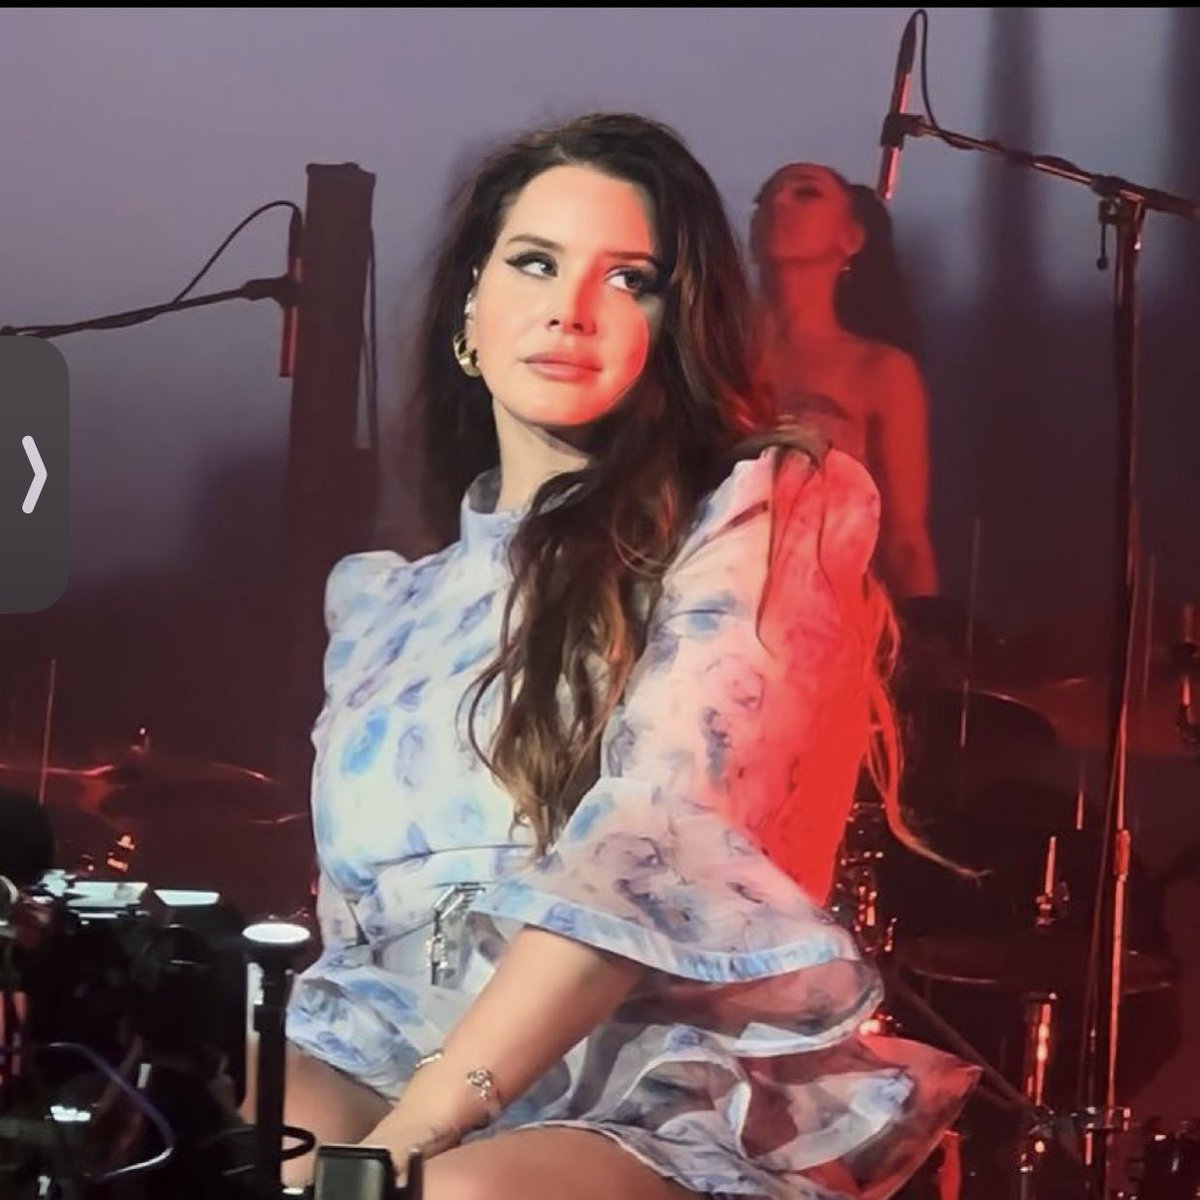 Lana Del Rey's Next Songs to Reach 20Million Streams On Spotify
1)Living Legend-19,4 M.
2)Taco Truck X VB-19,2 M.
3)NAWWAL-18,7 M.
4)Candy Necklace-18,3 M.
5)Looking For America-17,9 M.
6)Wait For Life-16,6 M.
7)DTWD-15,7M.
8)Cherry Blossom-15,4M.
9)The Trio-15,0M.
10)NOTG-14,2M.